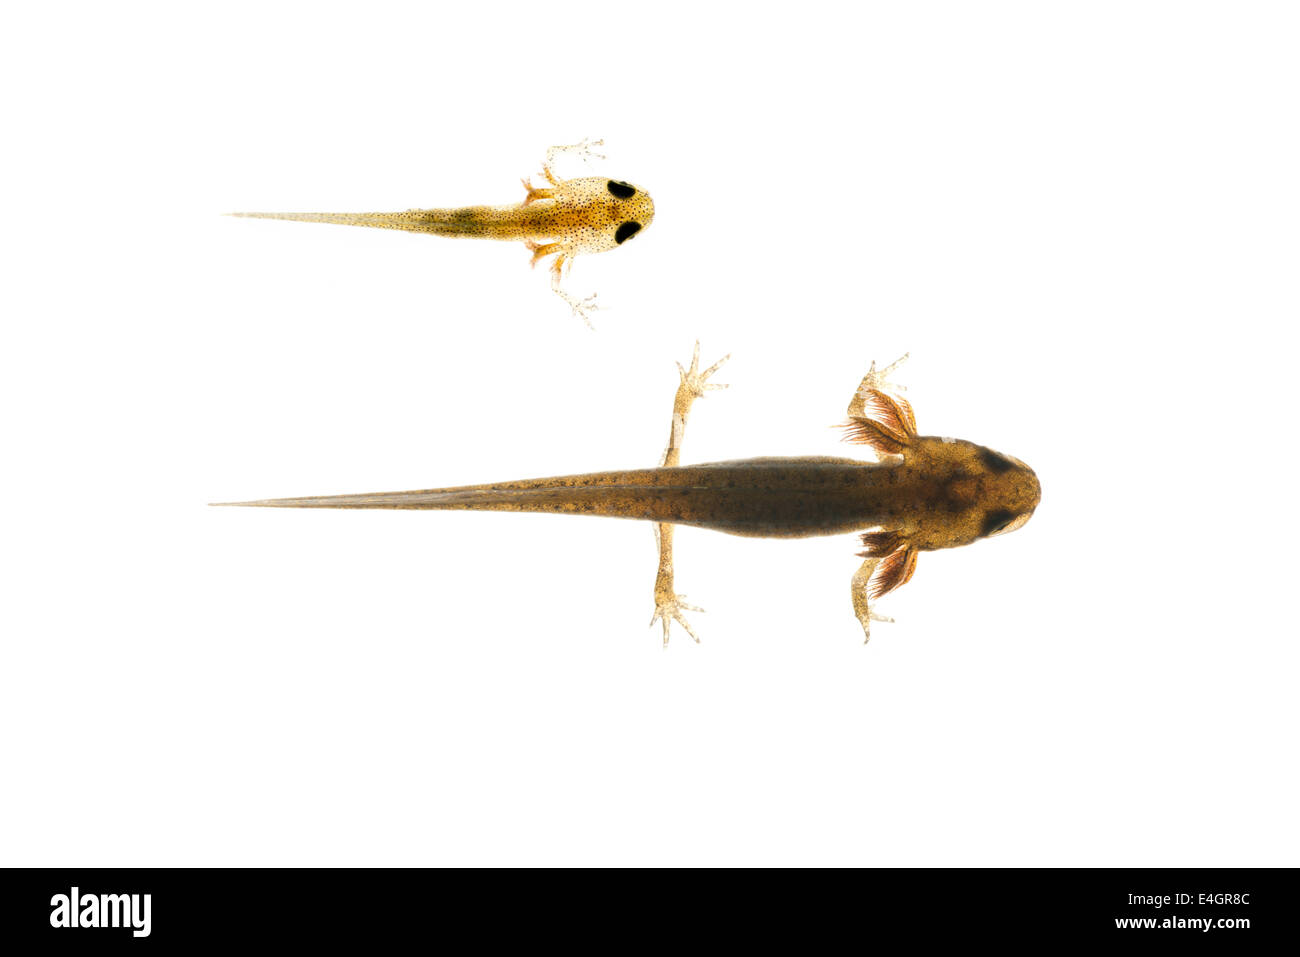 common smooth newt advanced larvae legs developing with external feathery gills will leave pond late summer or autumn 27 mm long Stock Photo